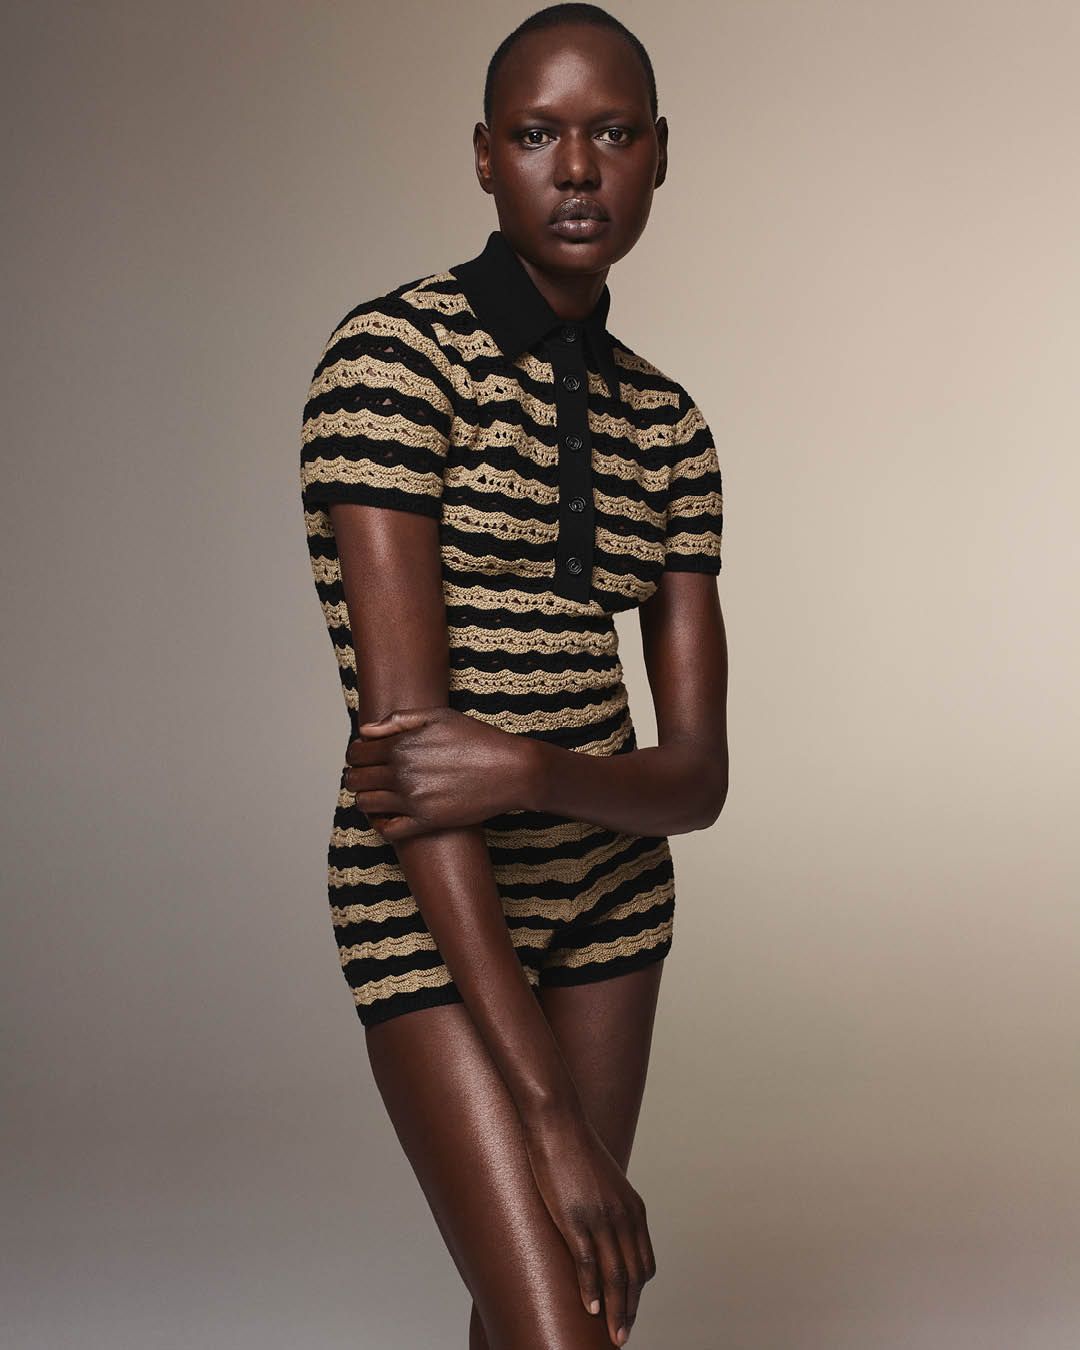 Ajak Deng wearing a matching black and beige crochet polo and hotpants